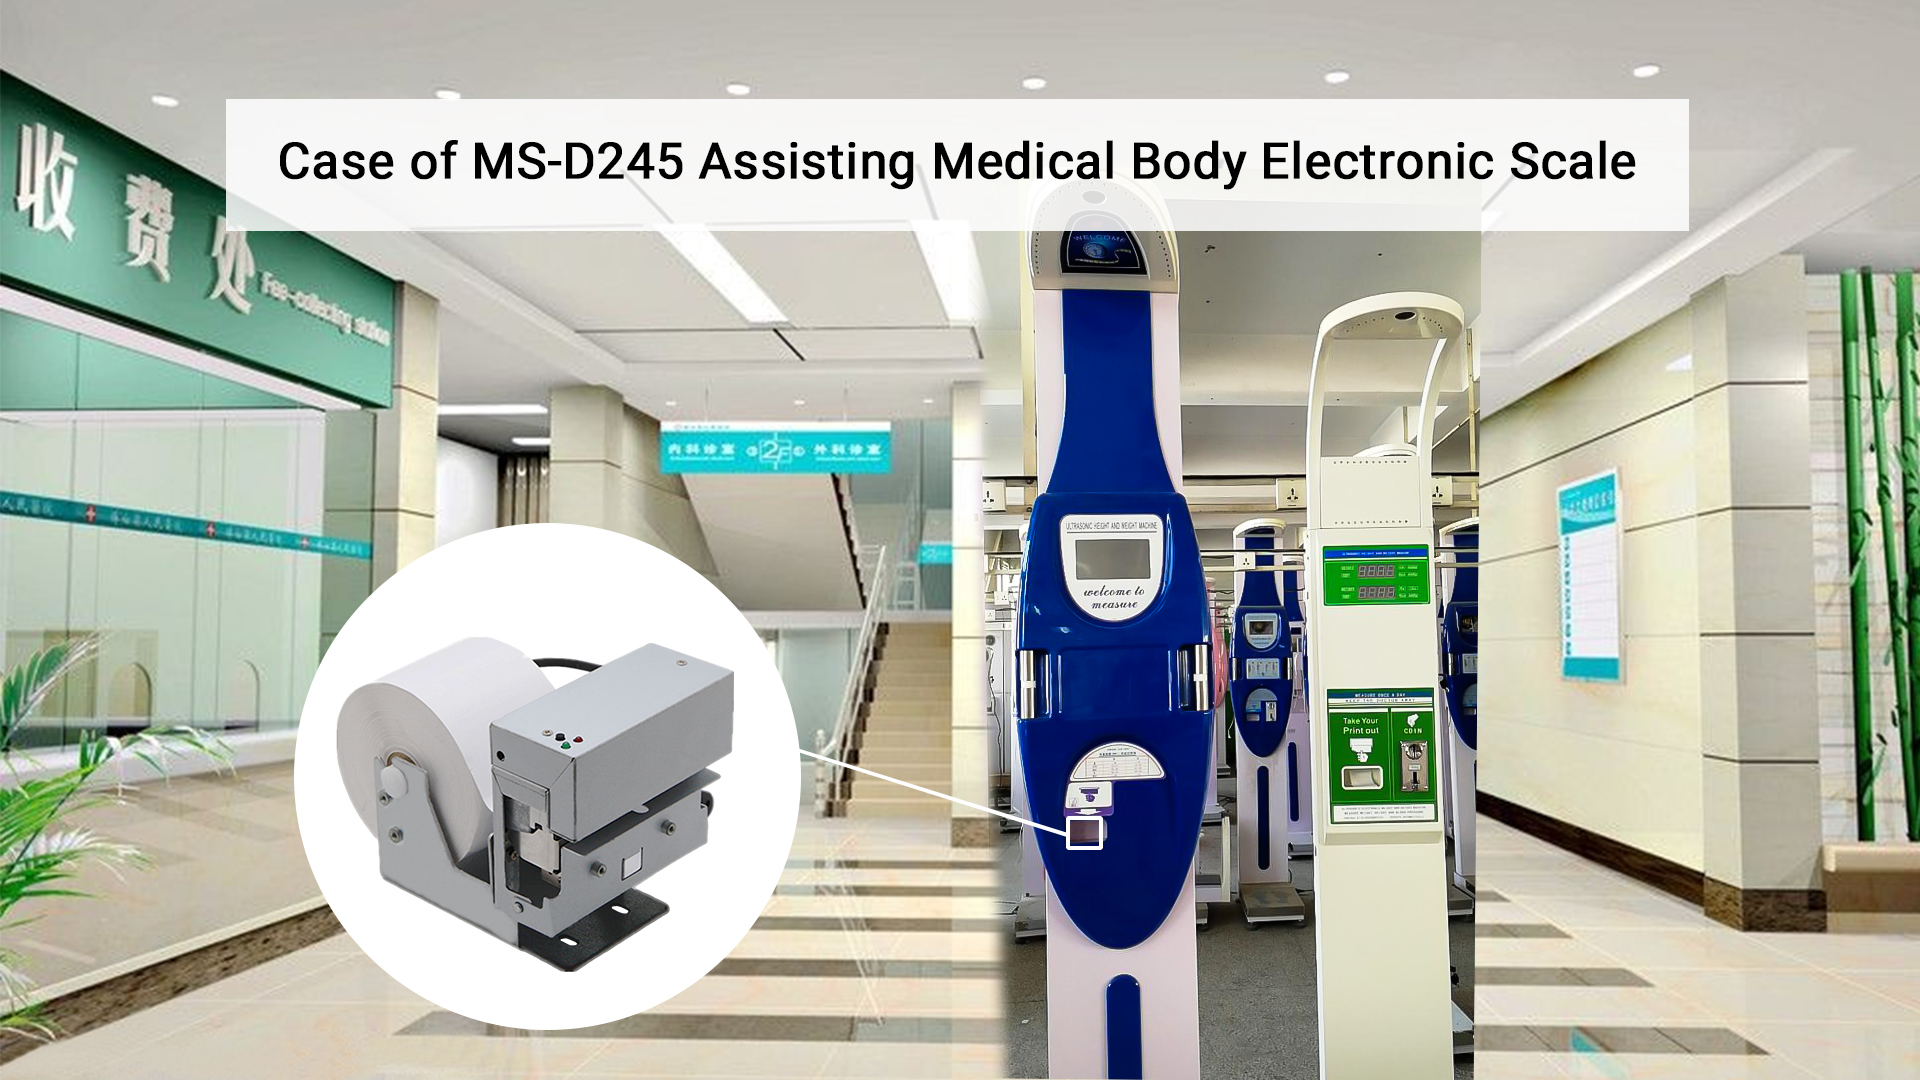 Masung printer MS-D245 helps medical human body electronic scale cases